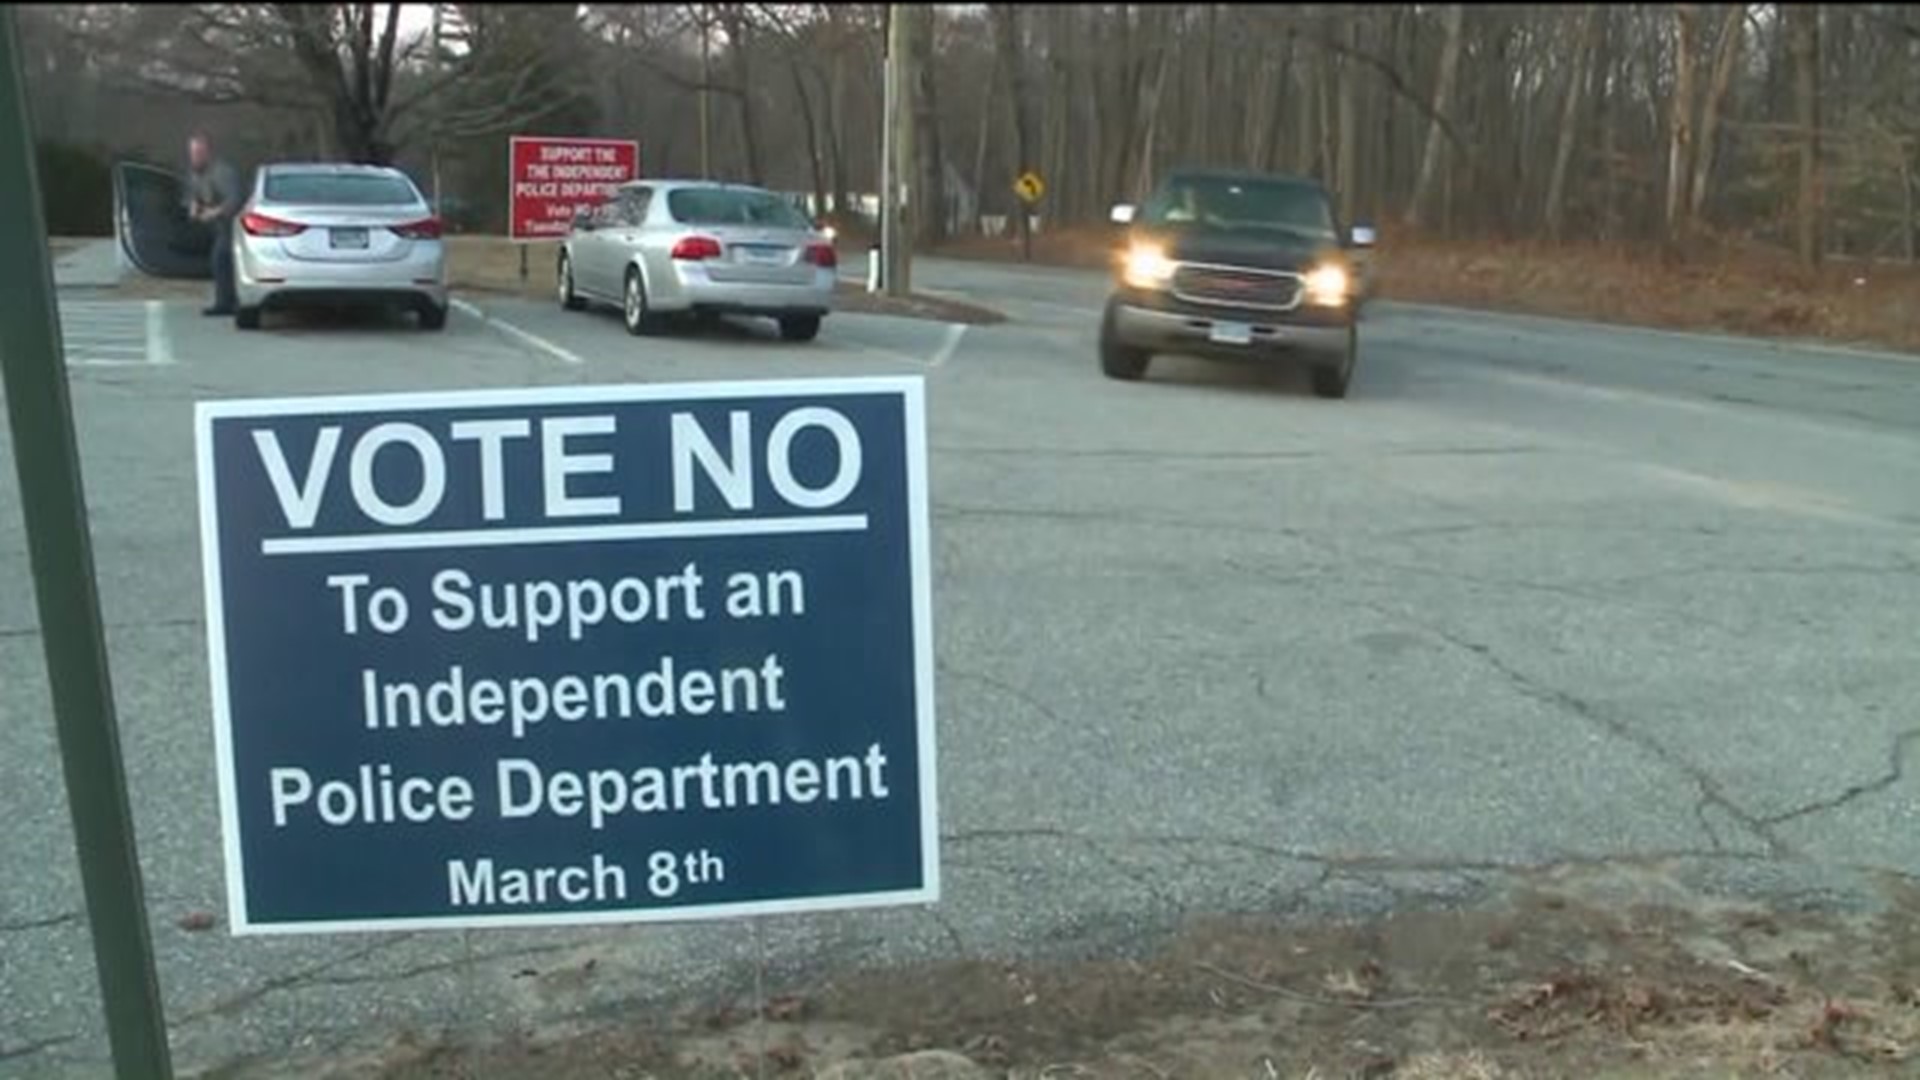 Montville residents decide not to institute independent police department